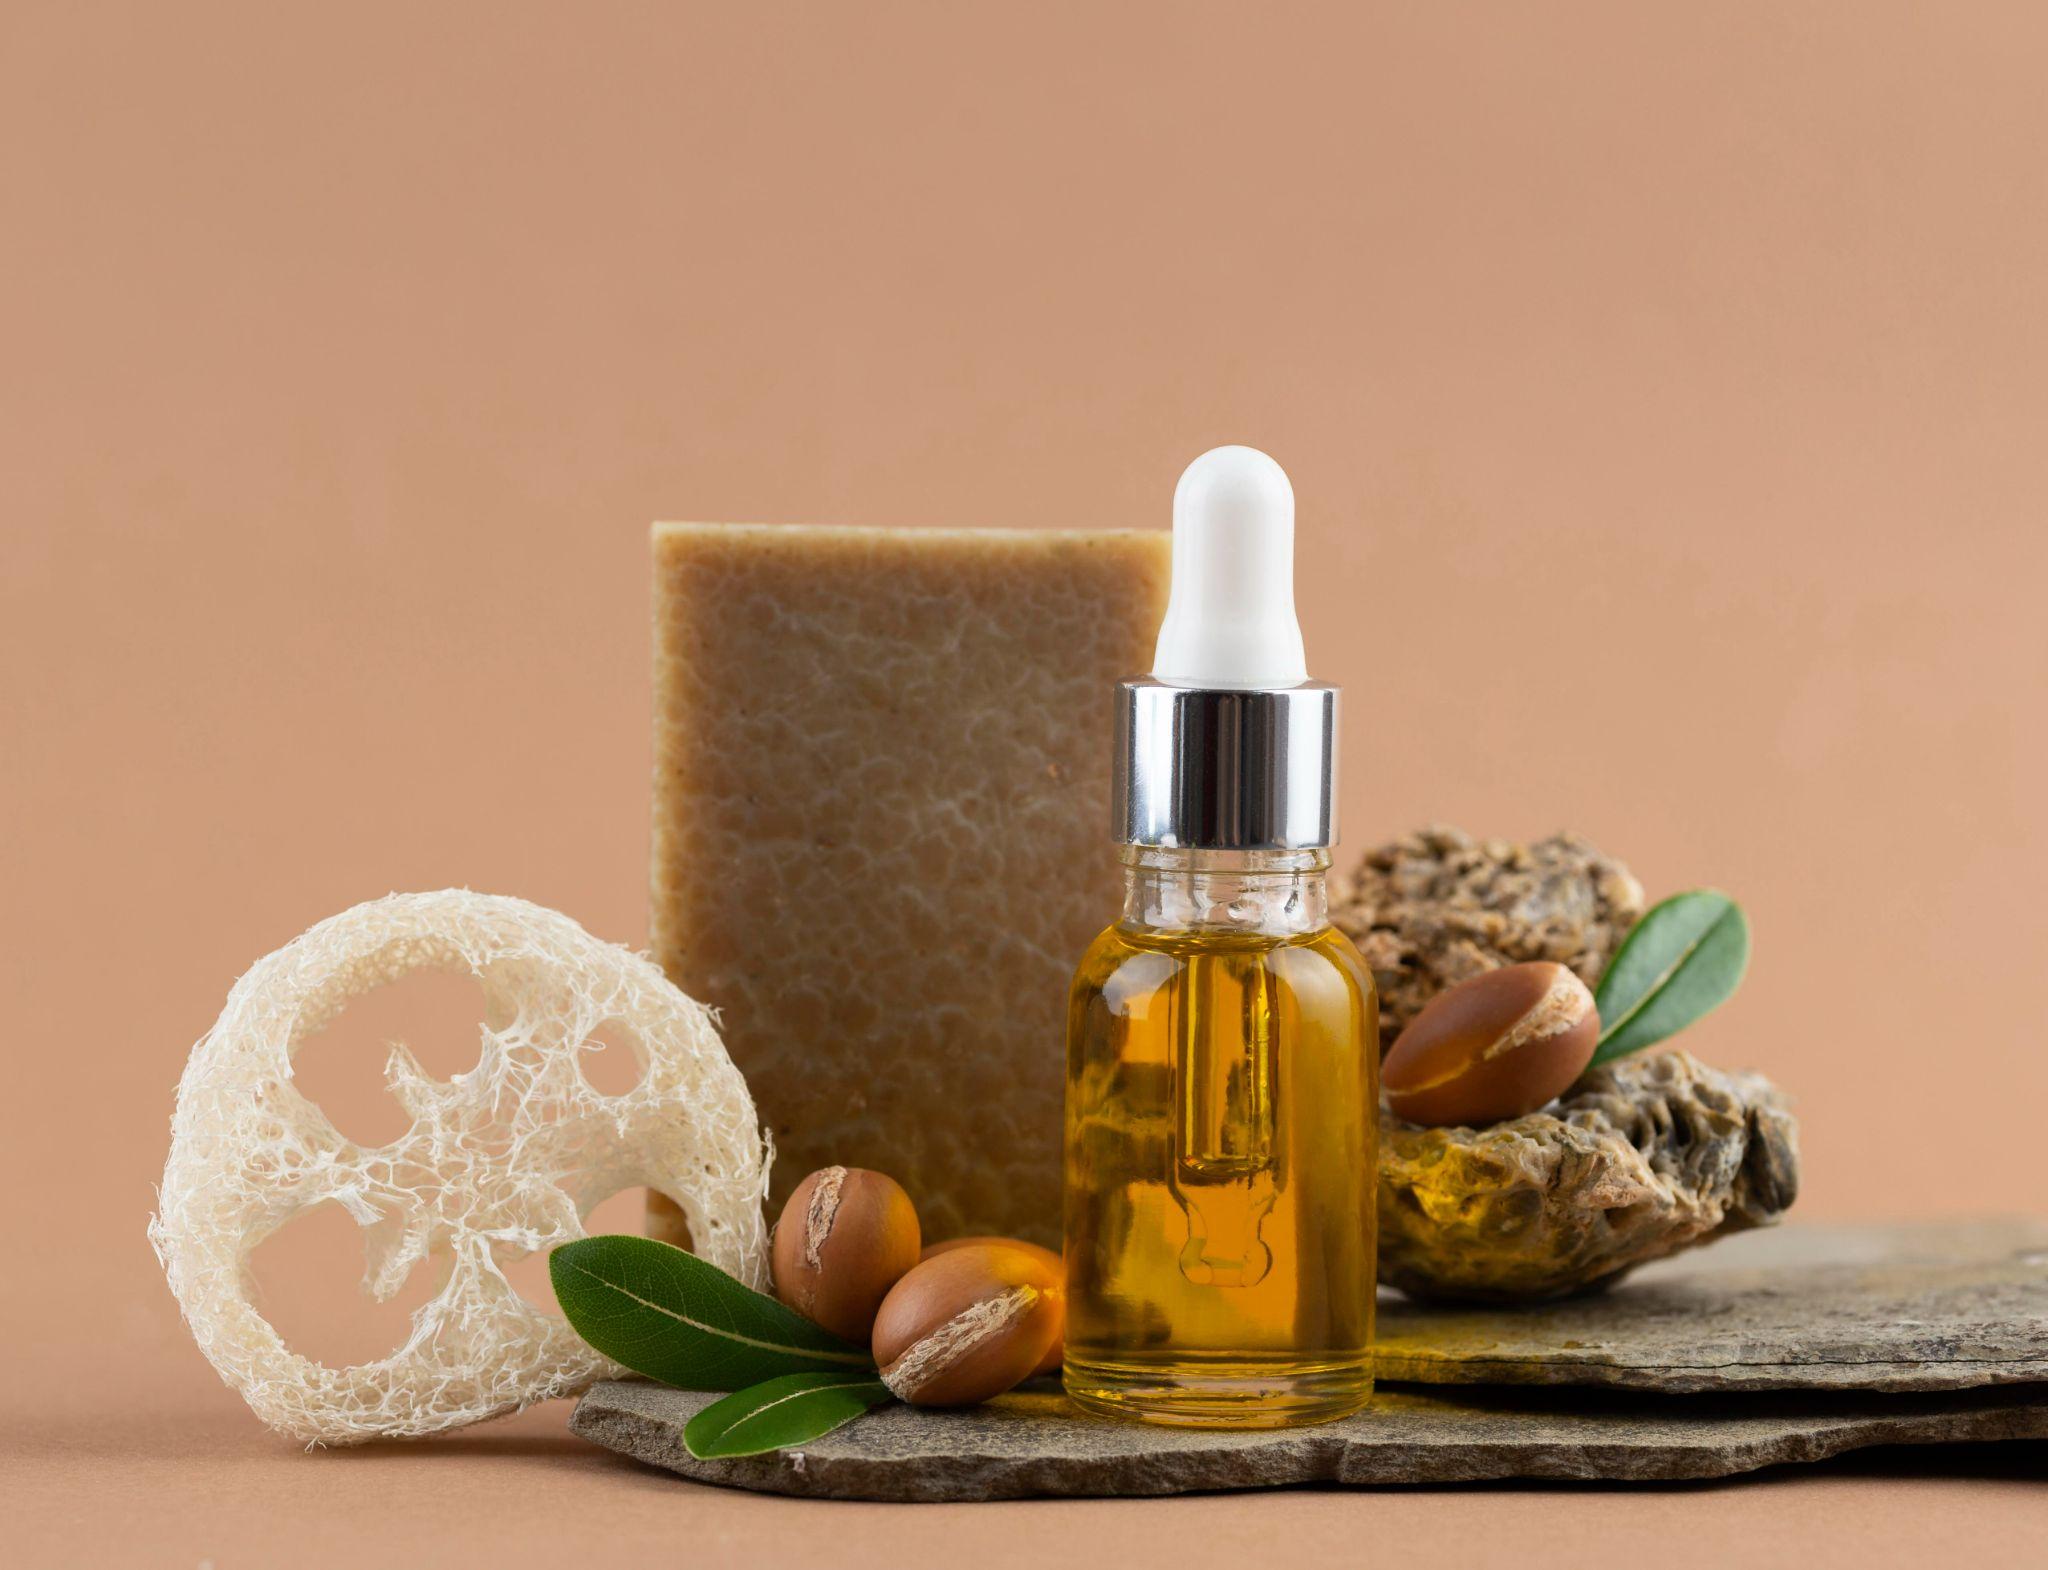 Summer Skincare 4 Natural Oils that Restore Hydration-Image 2